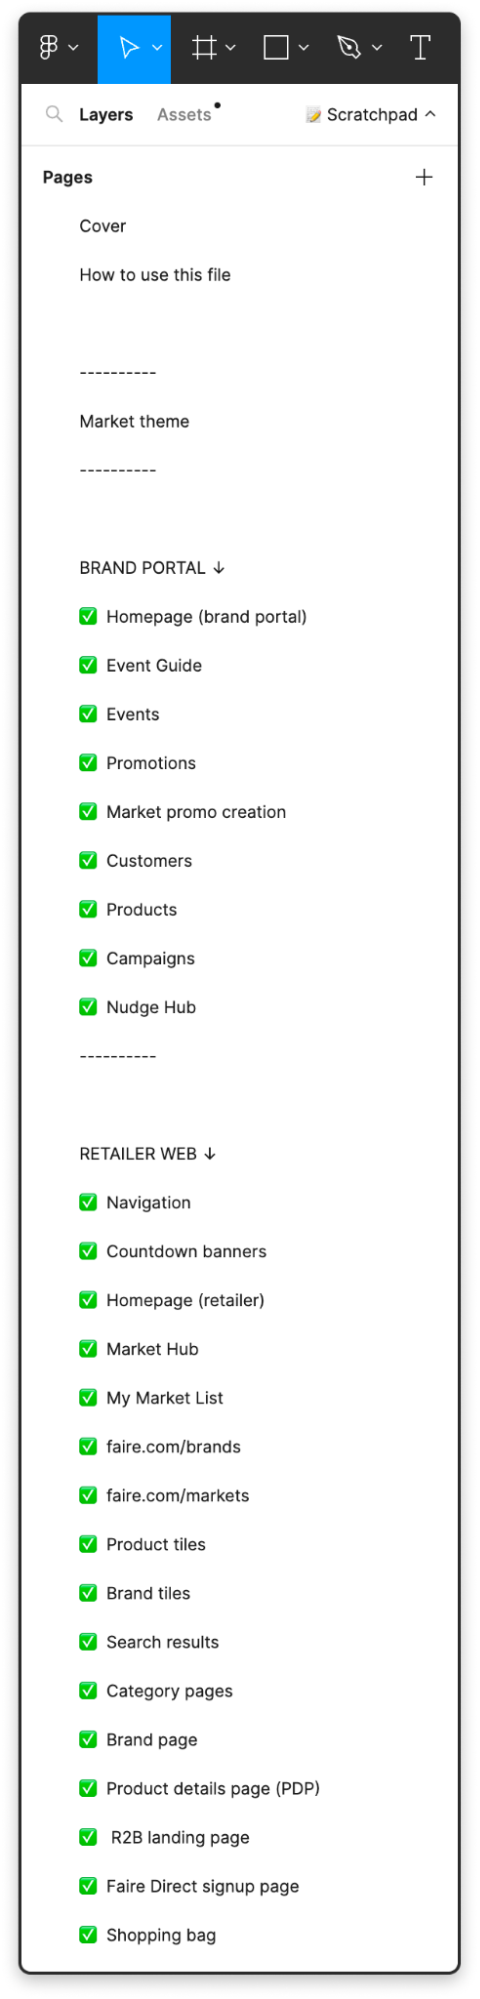 A screenshot showing our new Figma organization structure by Market Theme, then Brand Portal and Retailer Web.